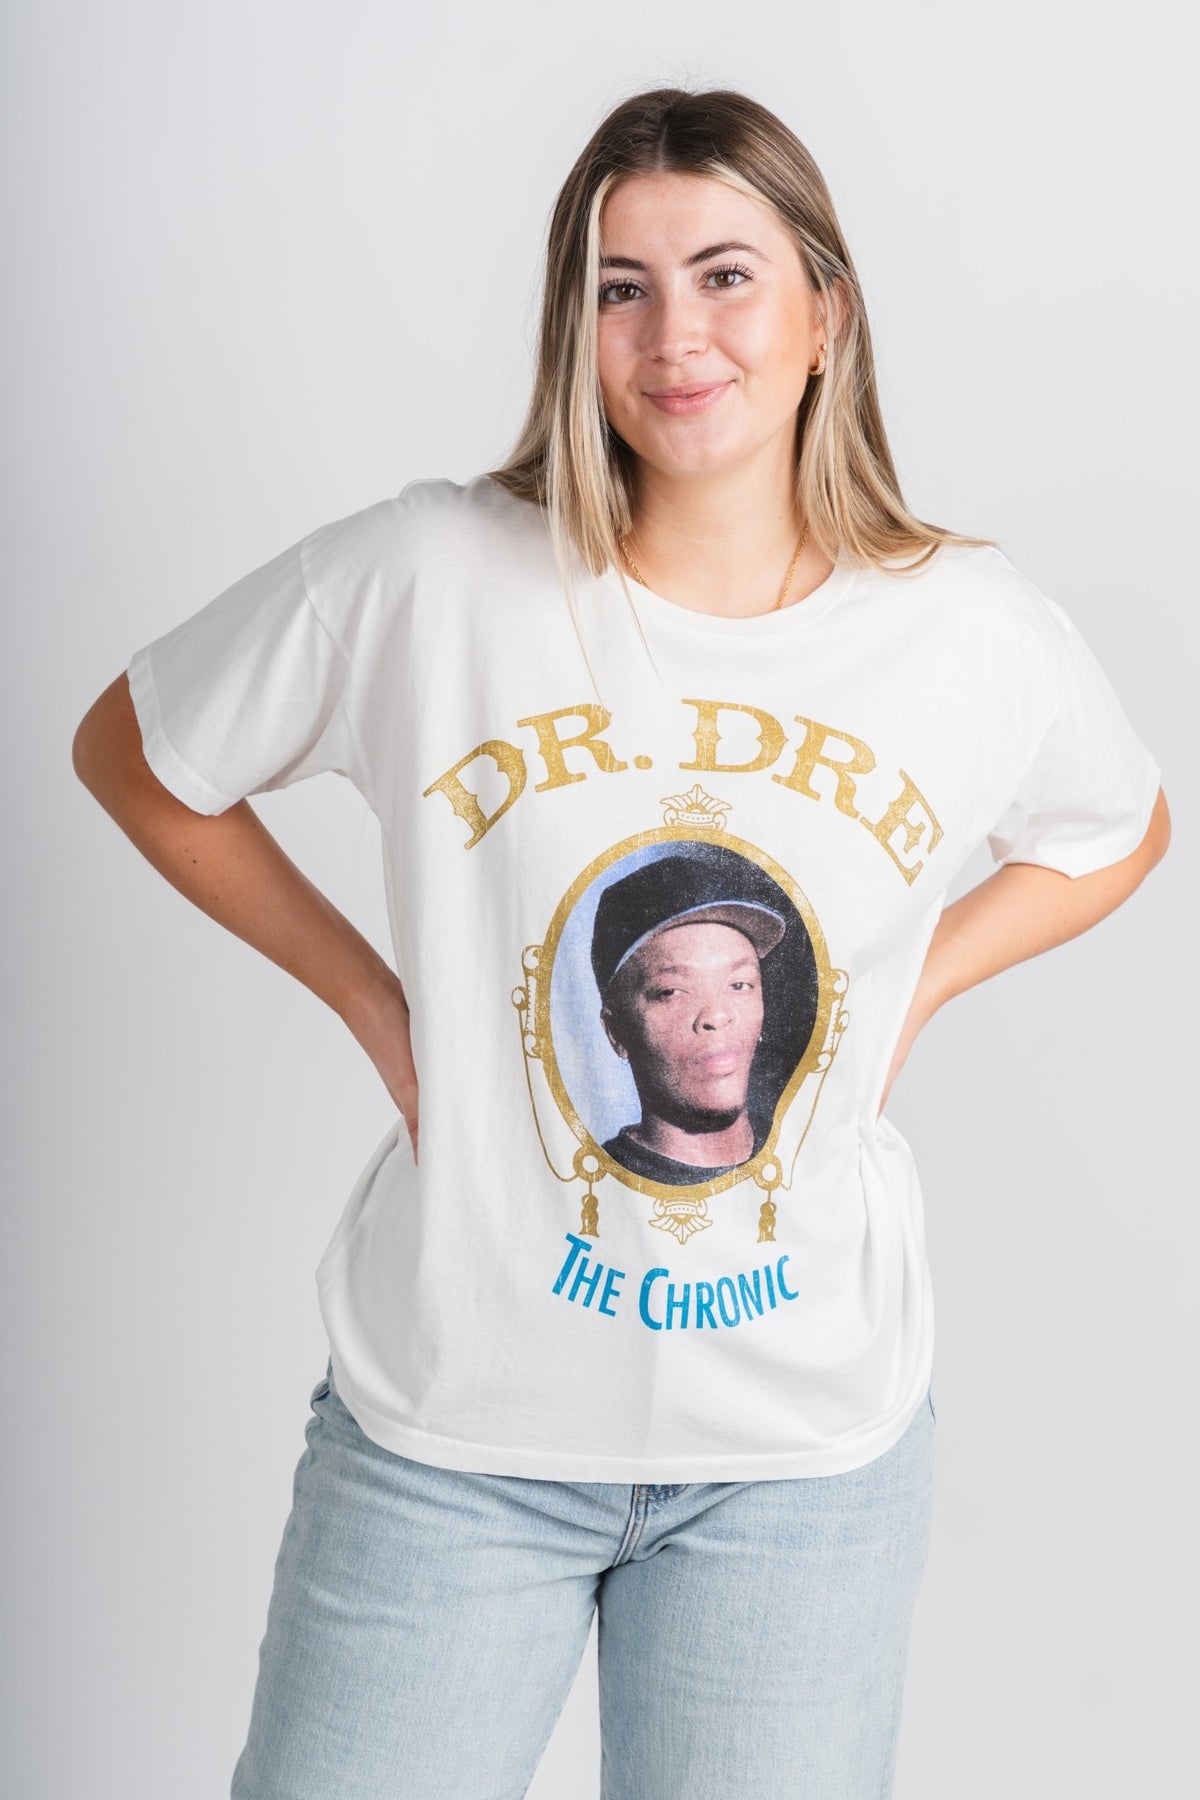 DayDreamer Dr. Dre the chronic merch t-shirt vintage white - DayDreamer Graphic Band Tees at Lush Fashion Lounge Trendy Boutique in Oklahoma City